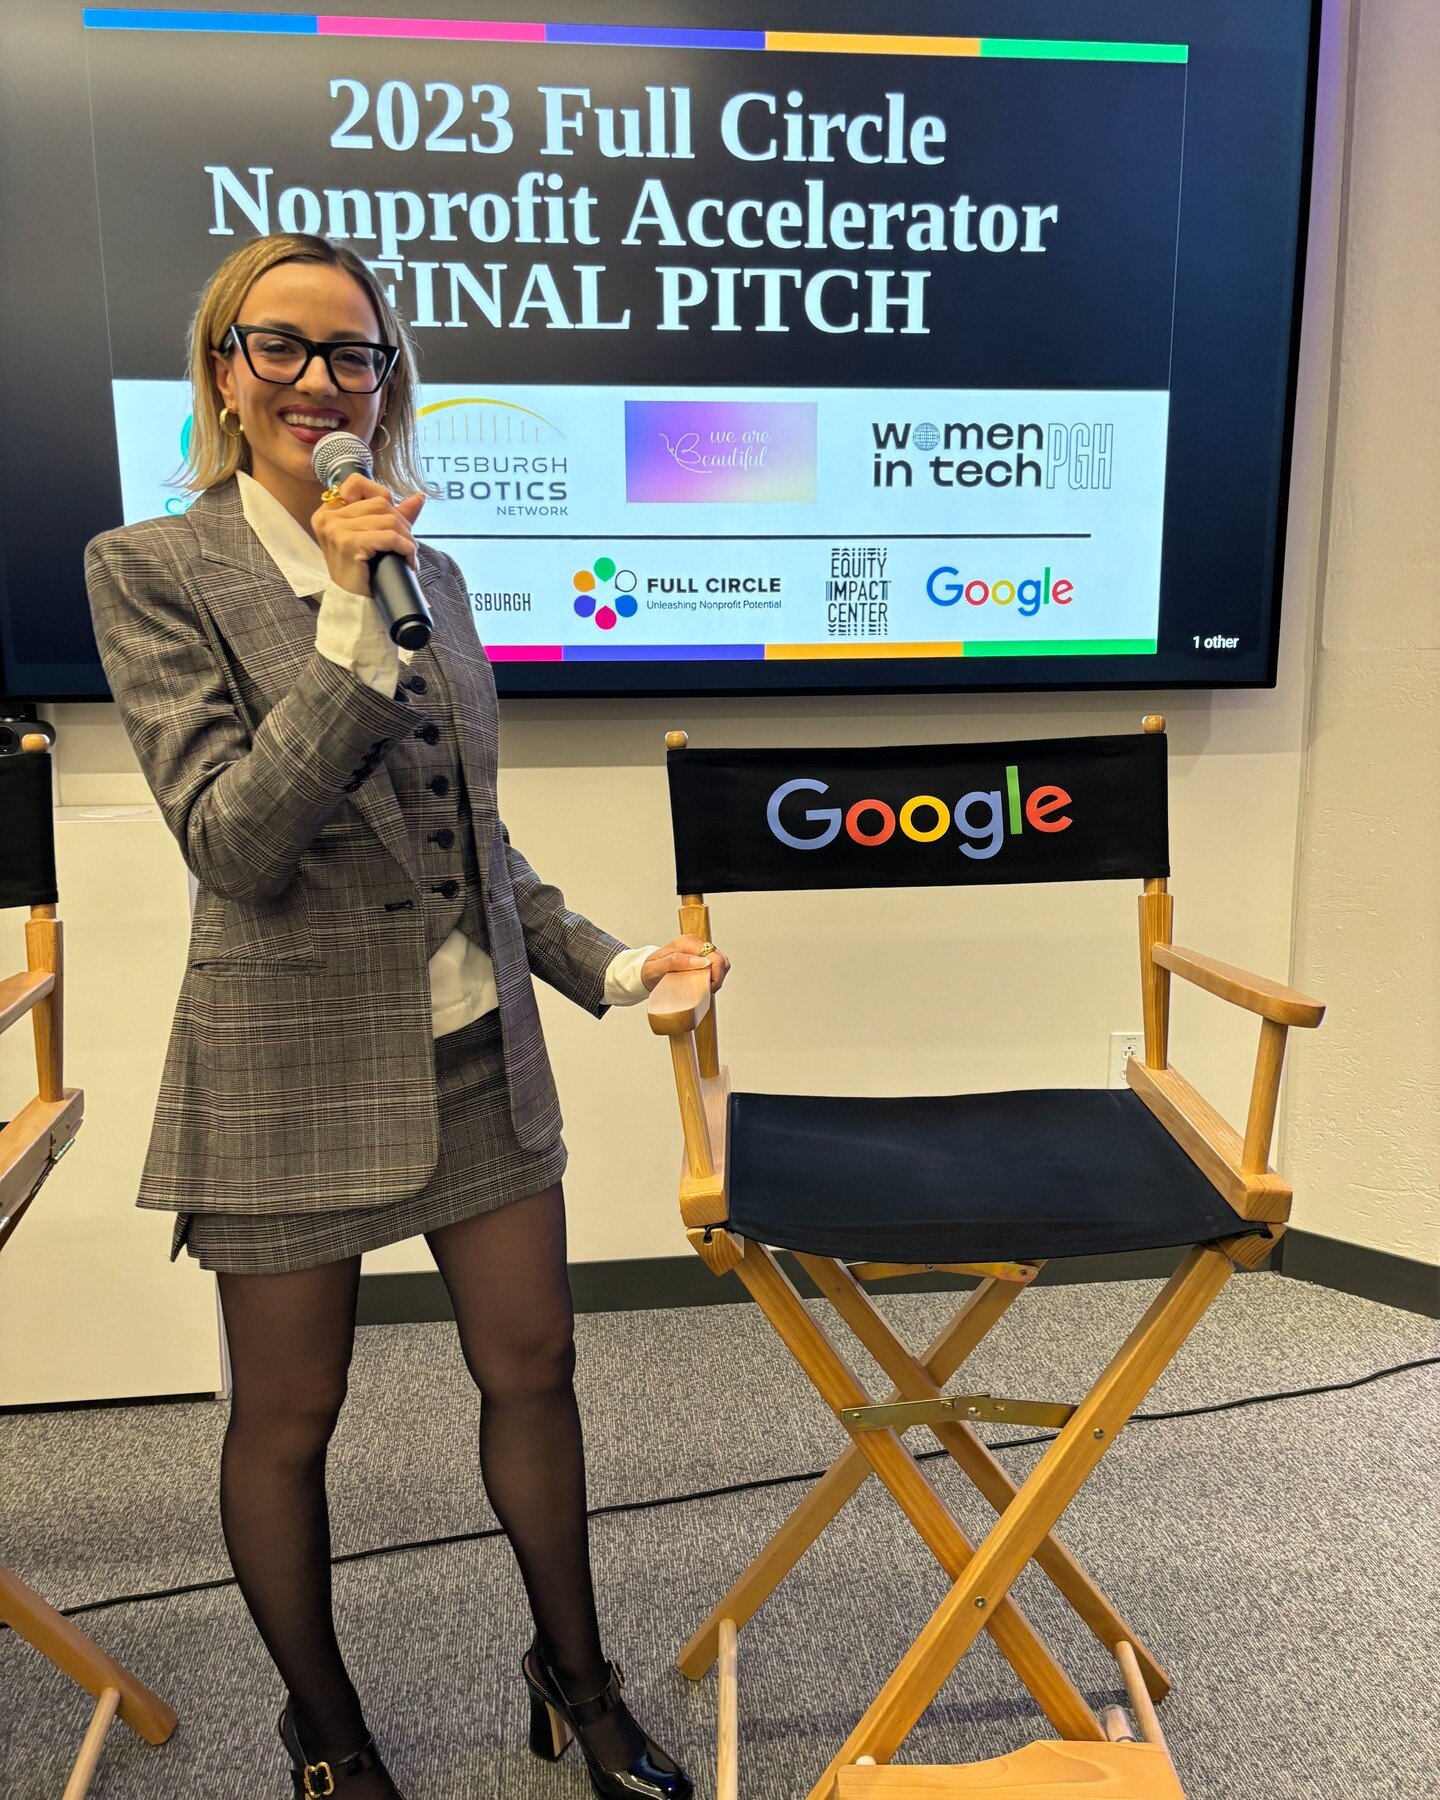 It was such an honor to be able to tell our story and pitch WITPGH at @google last night!

If you took anything away from the conversation, we hope it was to approach nonprofits with the same respect you would any other type of company. We are entrep